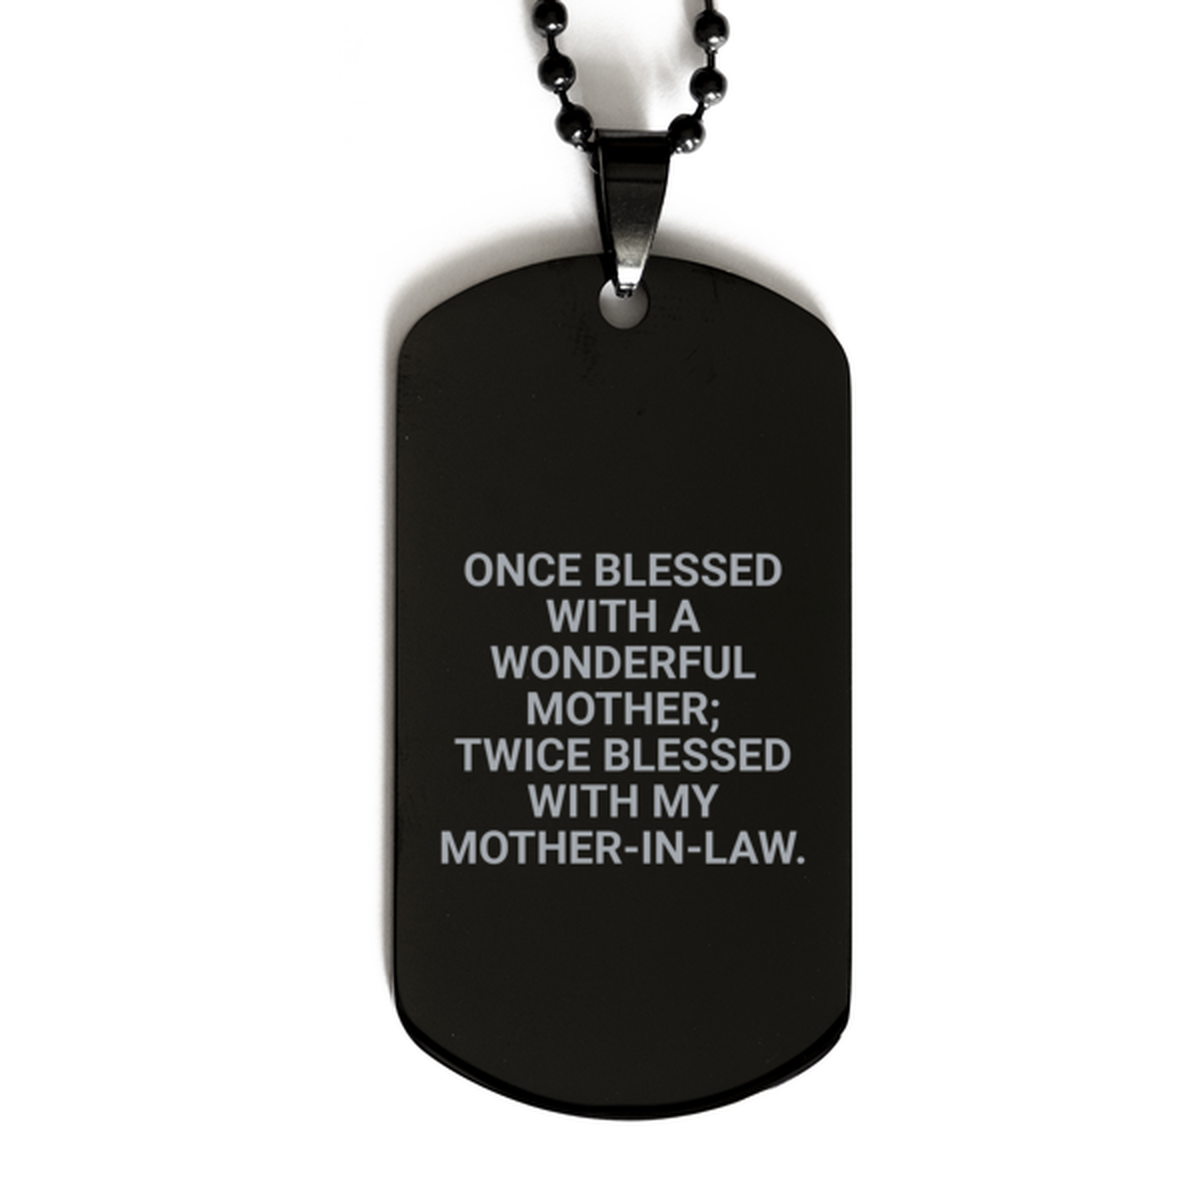 To My Mother-In-Law Black Dog Tag, Wonderful Mother, Valentines Gifts For Mother-In-Law From Daughter-In-Law, Birthday Gifts For Women